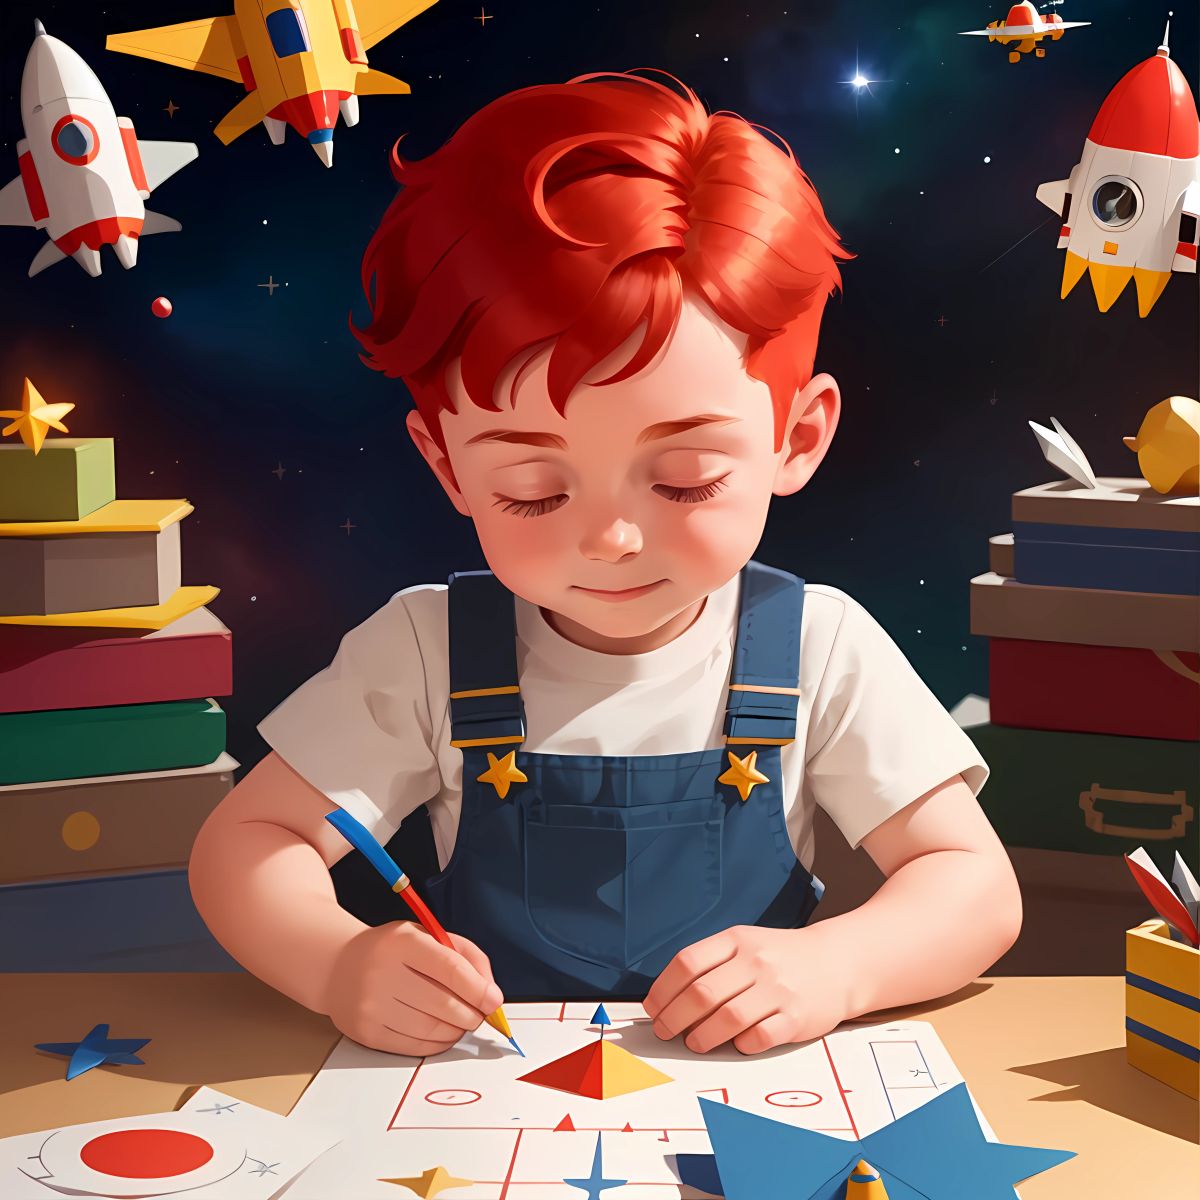 Adam constructing his very own rocket, folding stacks of vibrant, multicolored paper into the intricate shape of a spacecraft, his excitement surging with each fold."